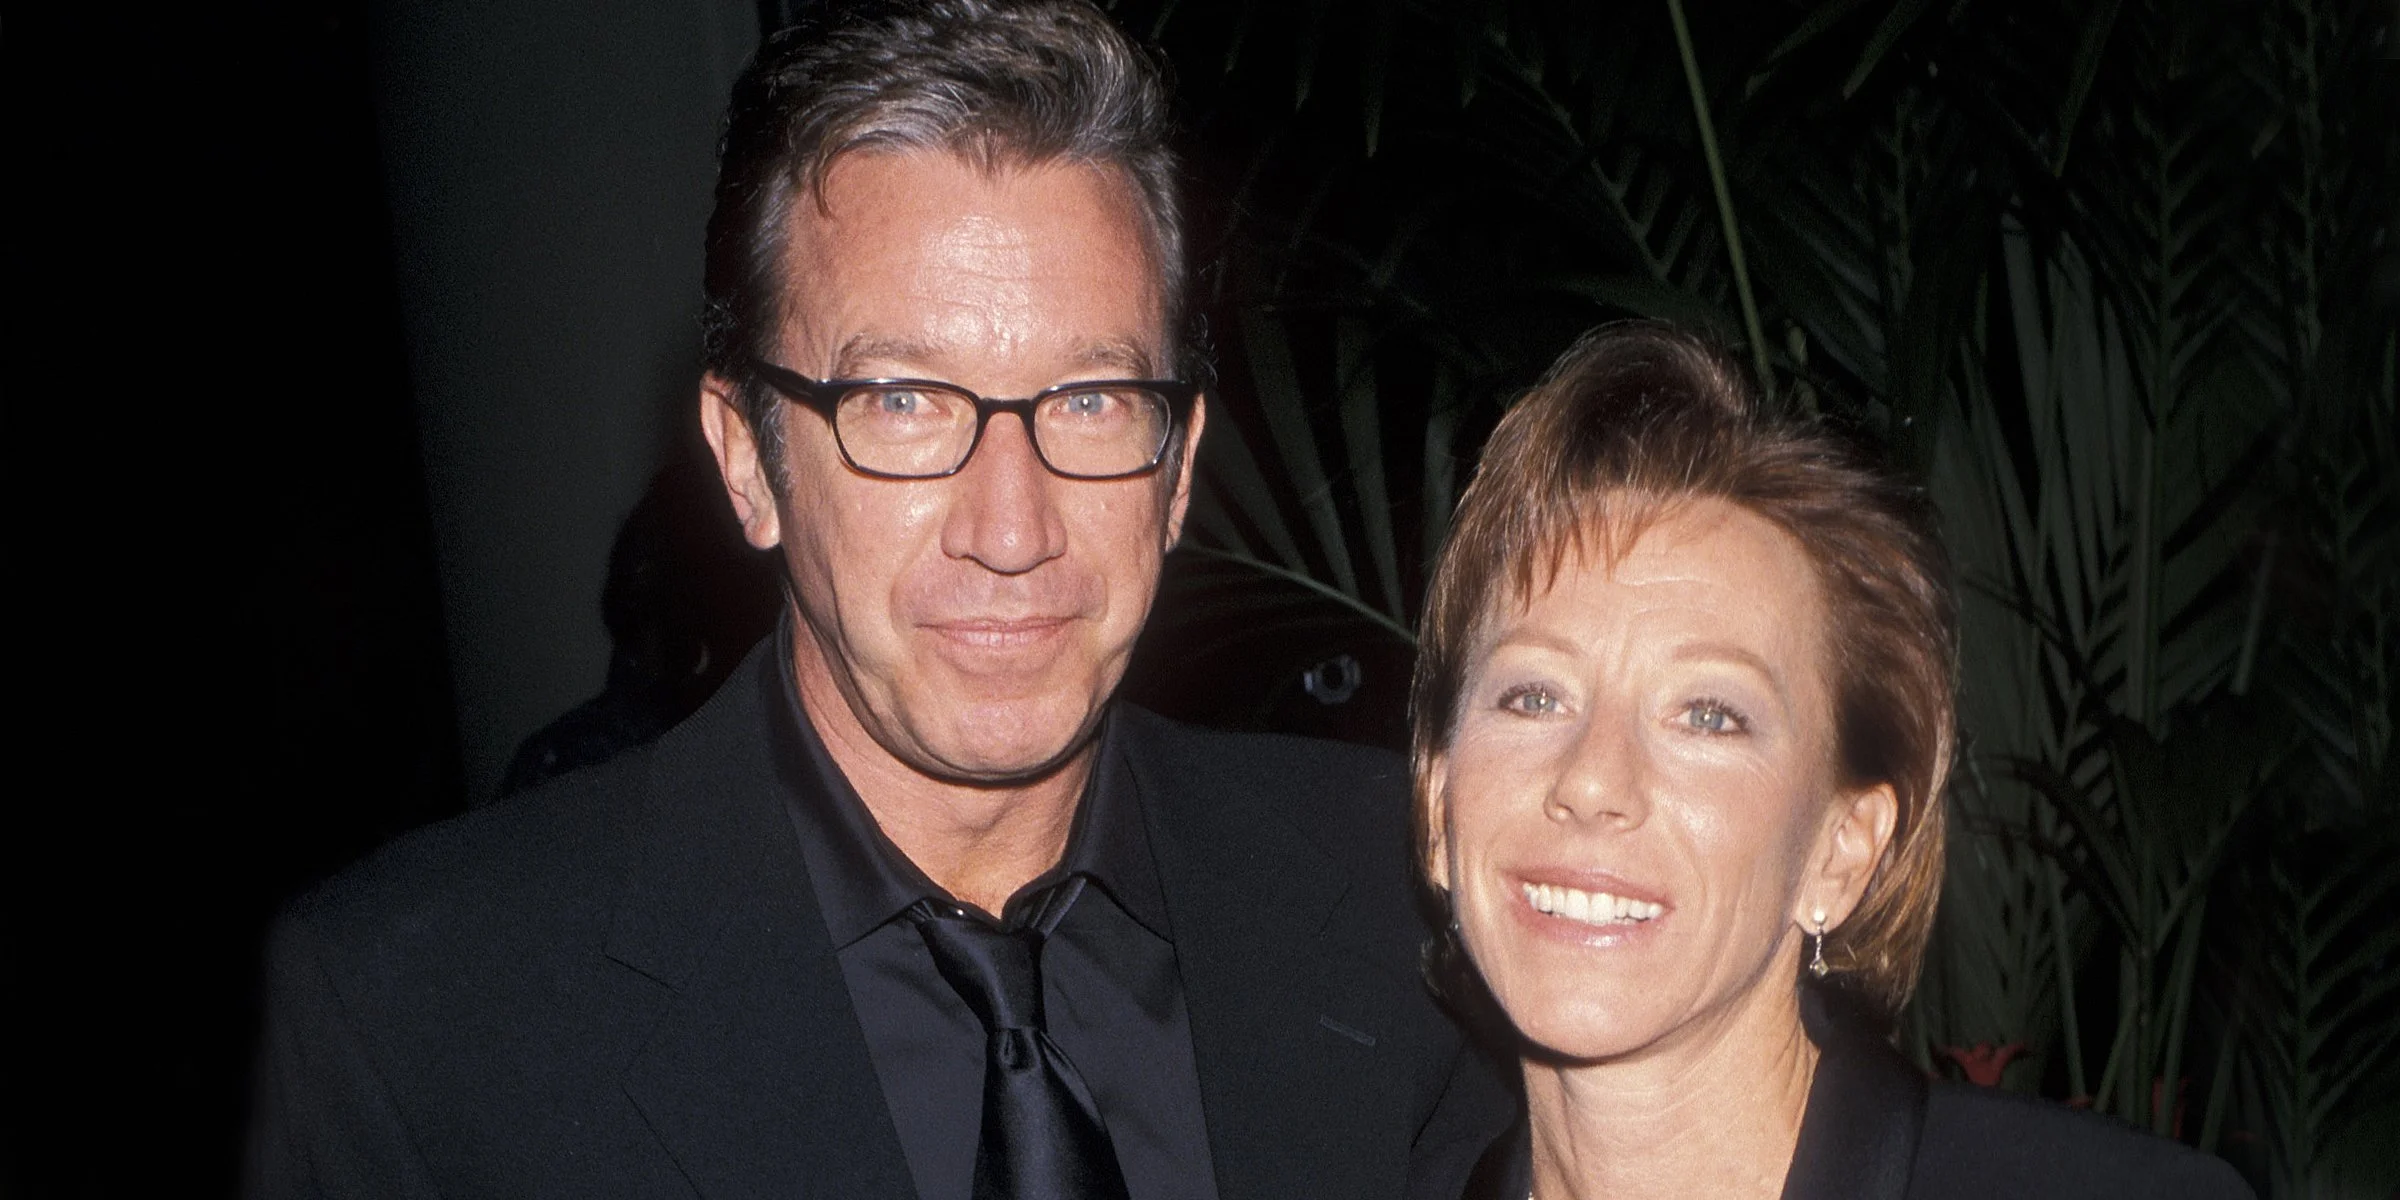 Who Is Laura Deibel? Age, Bio, Career And More Of Tim Allen’s Ex-Wife